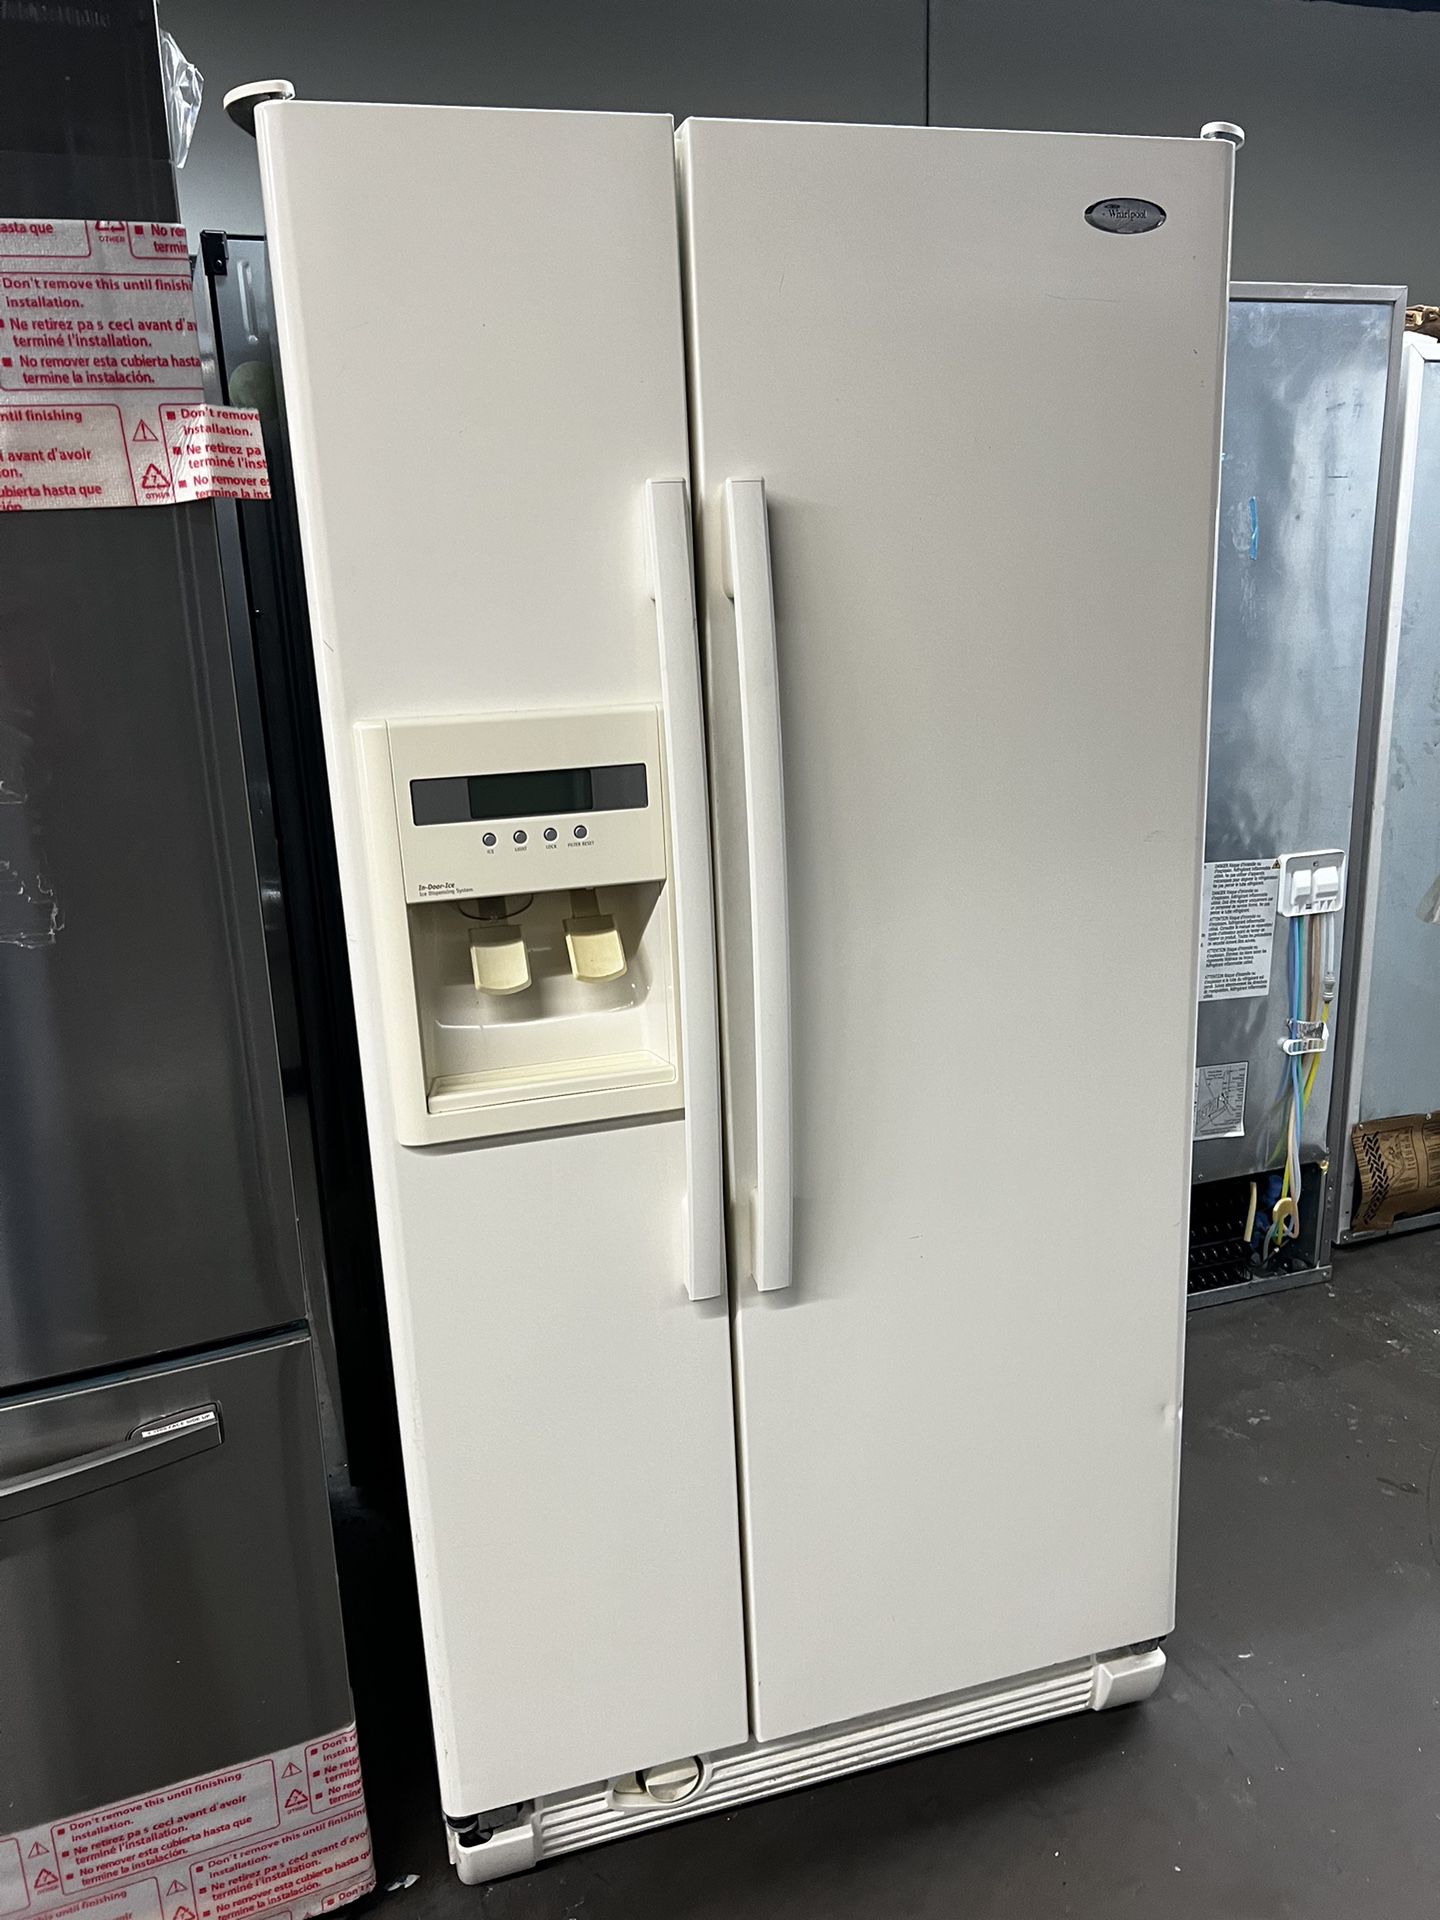 Whirlpool 33”Wide Side by Side Refrigerator In Almond Color 